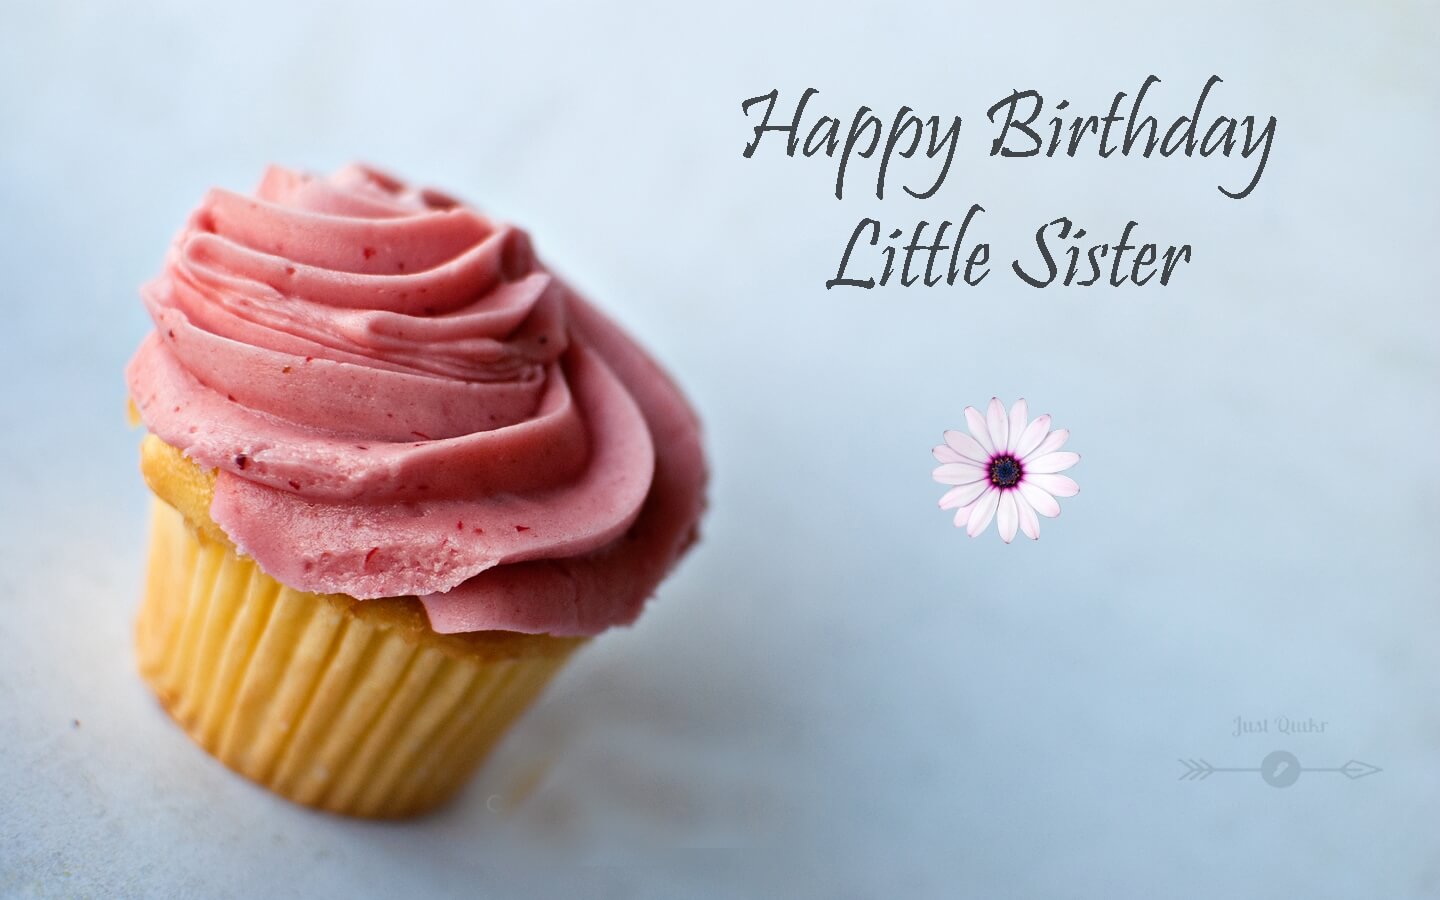 Happy Birthday Shayari HD Pics Images for Little Sister in English